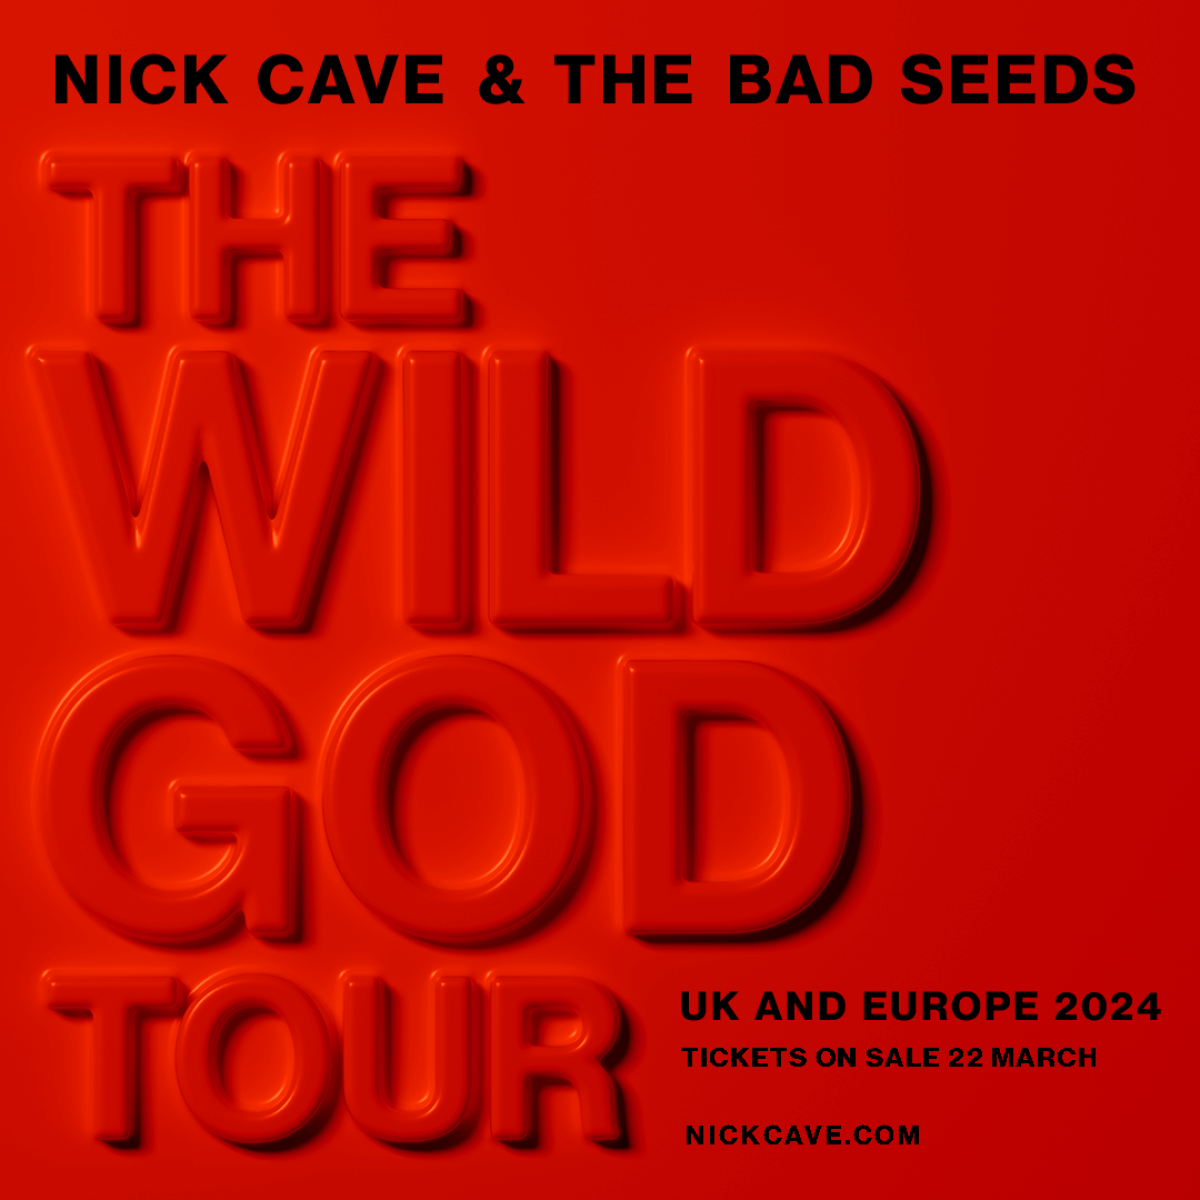 Nick Cave and the Bad Seeds - The Wild God Tour at Barclays Arena Tickets